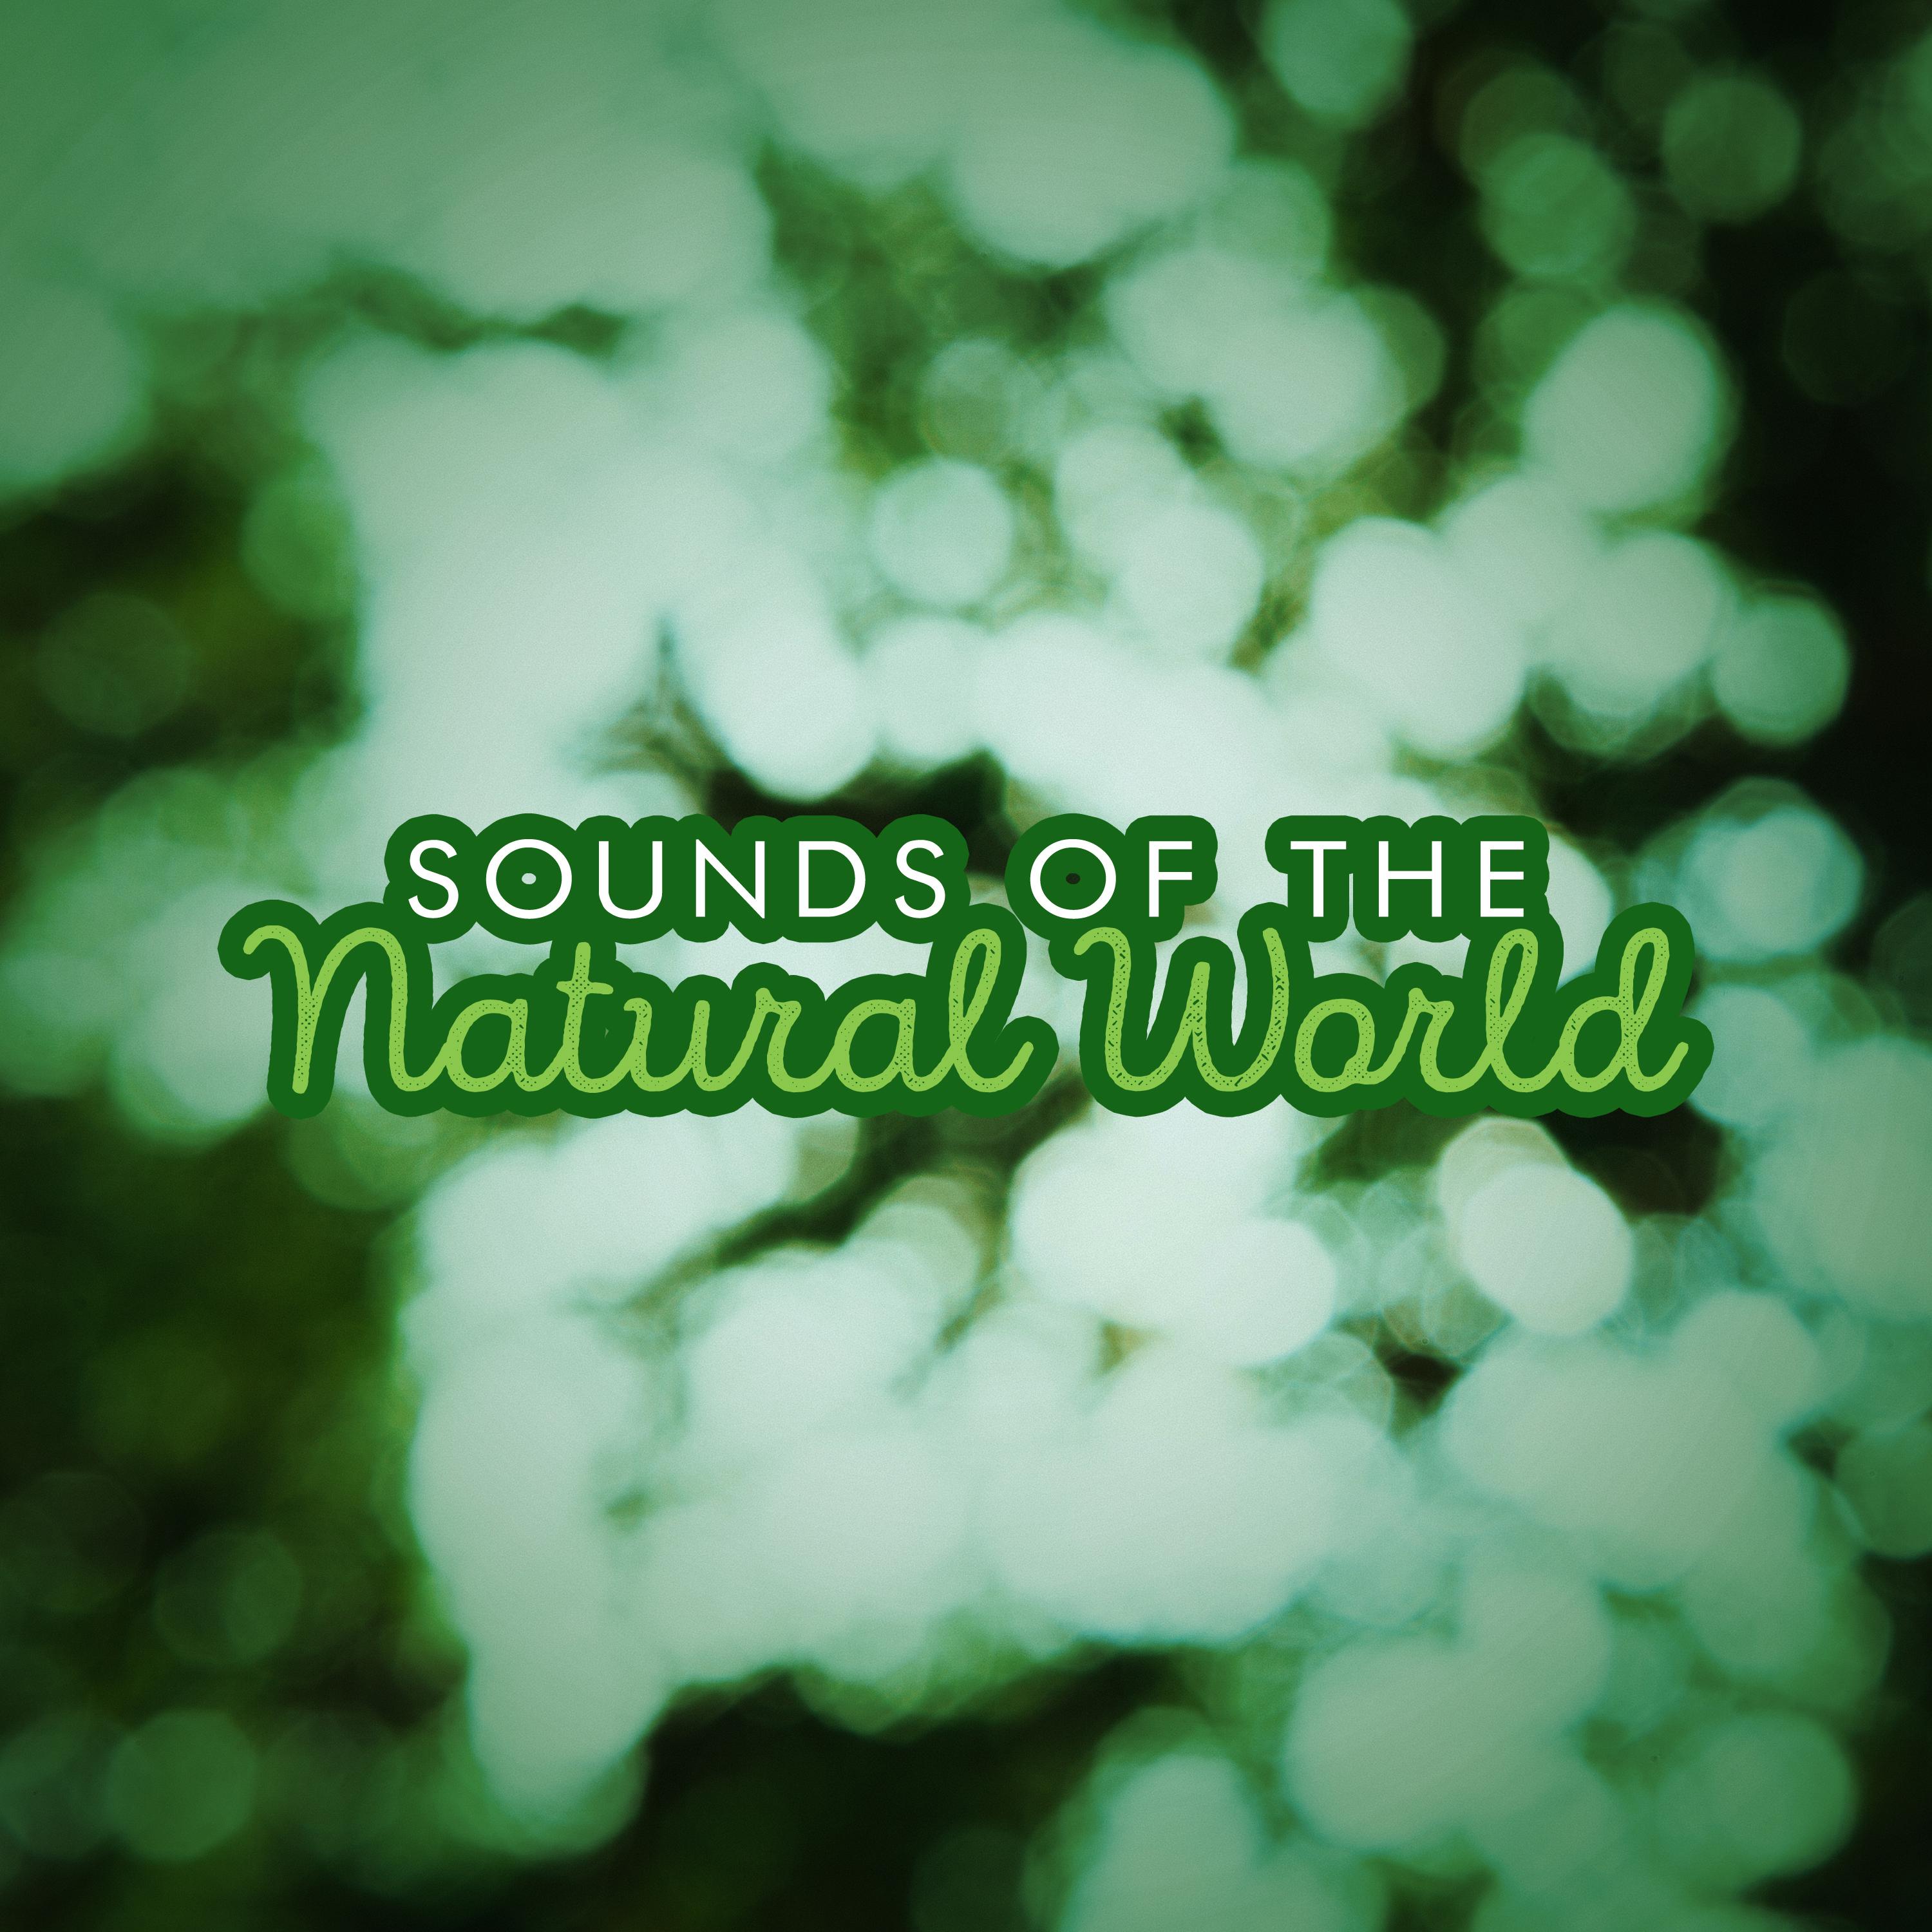 Sounds of the Natural World